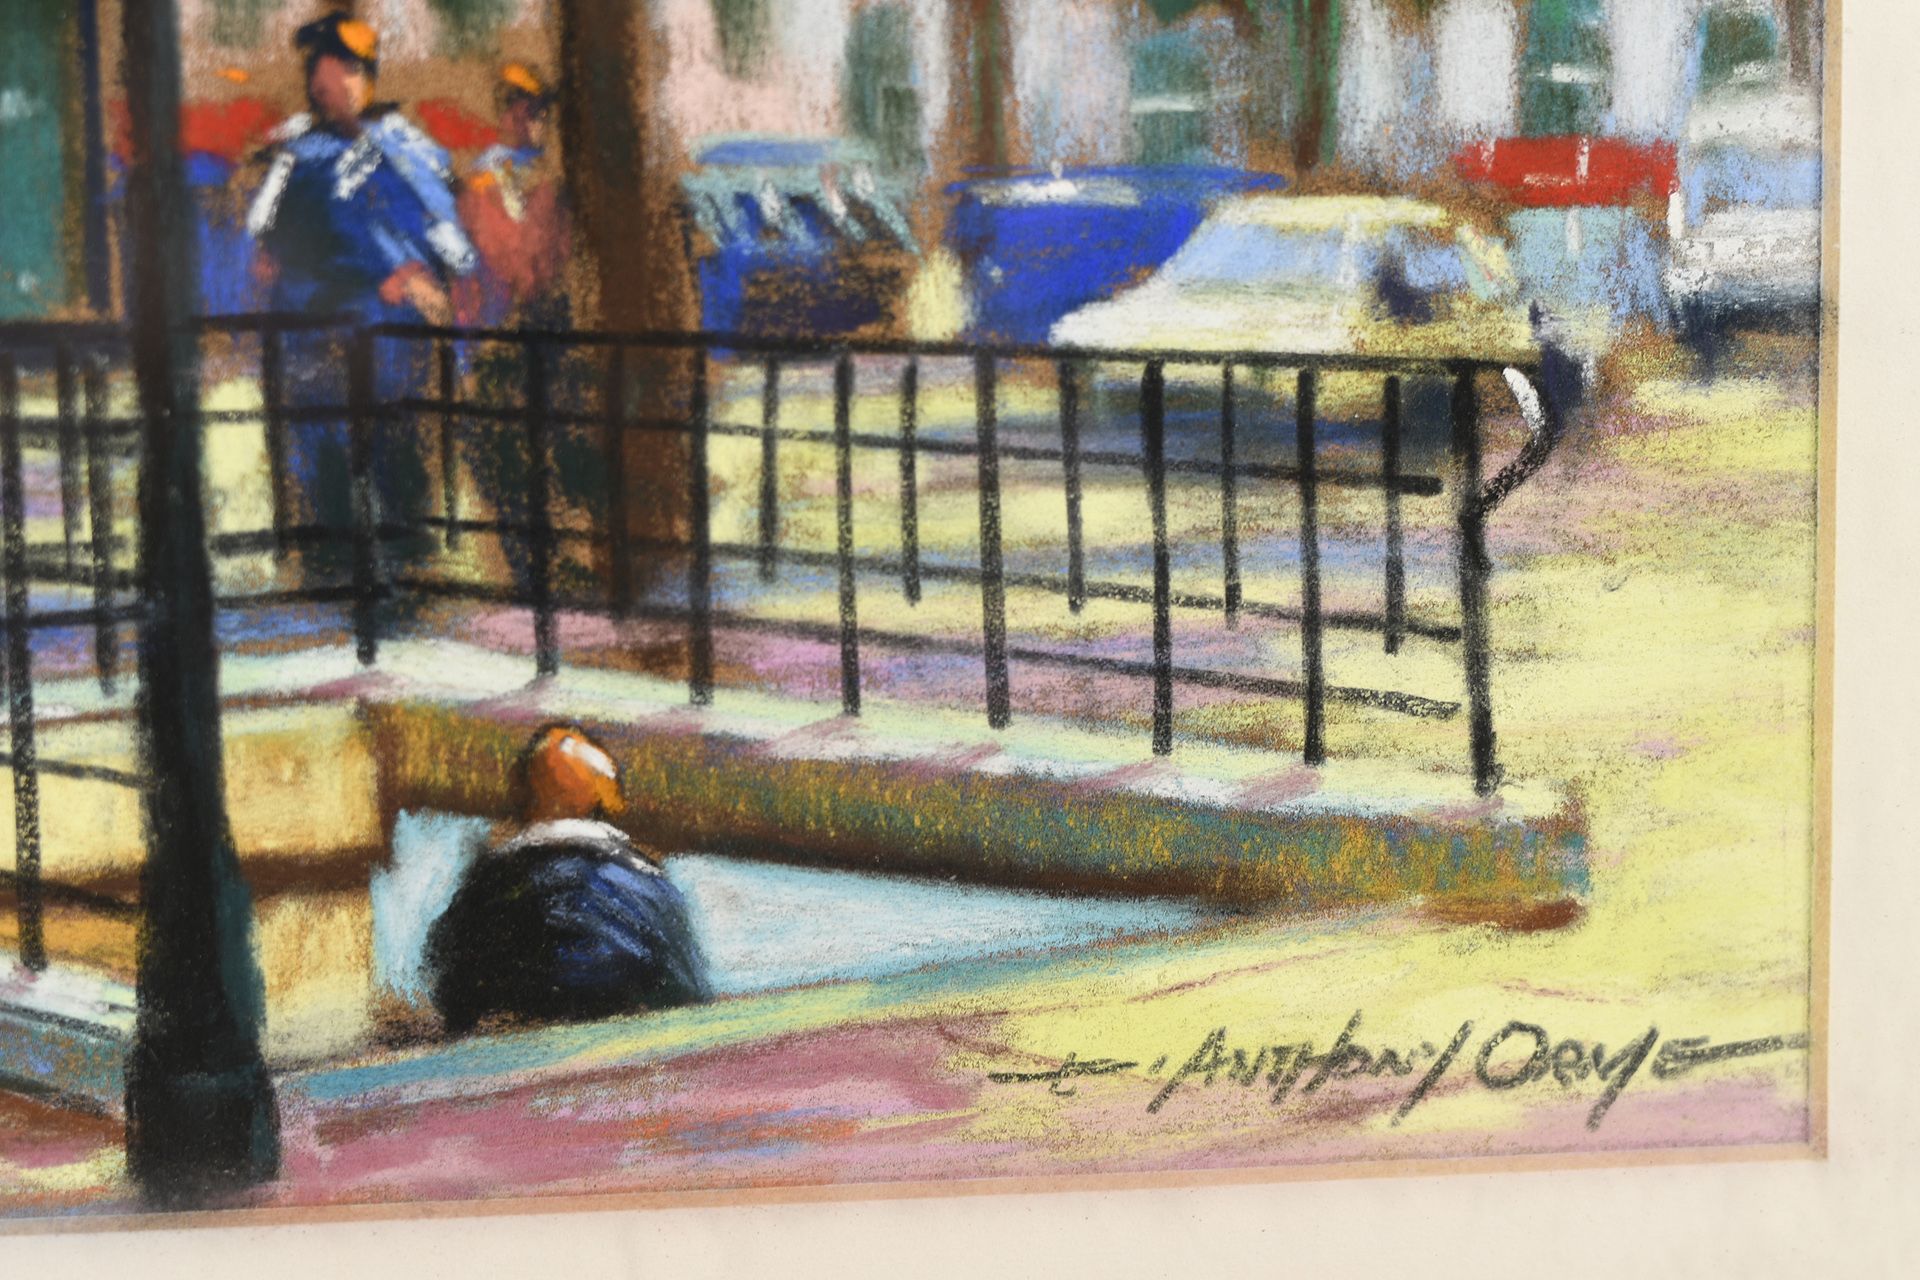 Original Painting of Paris by English Artist Anthony Orme - Image 5 of 8